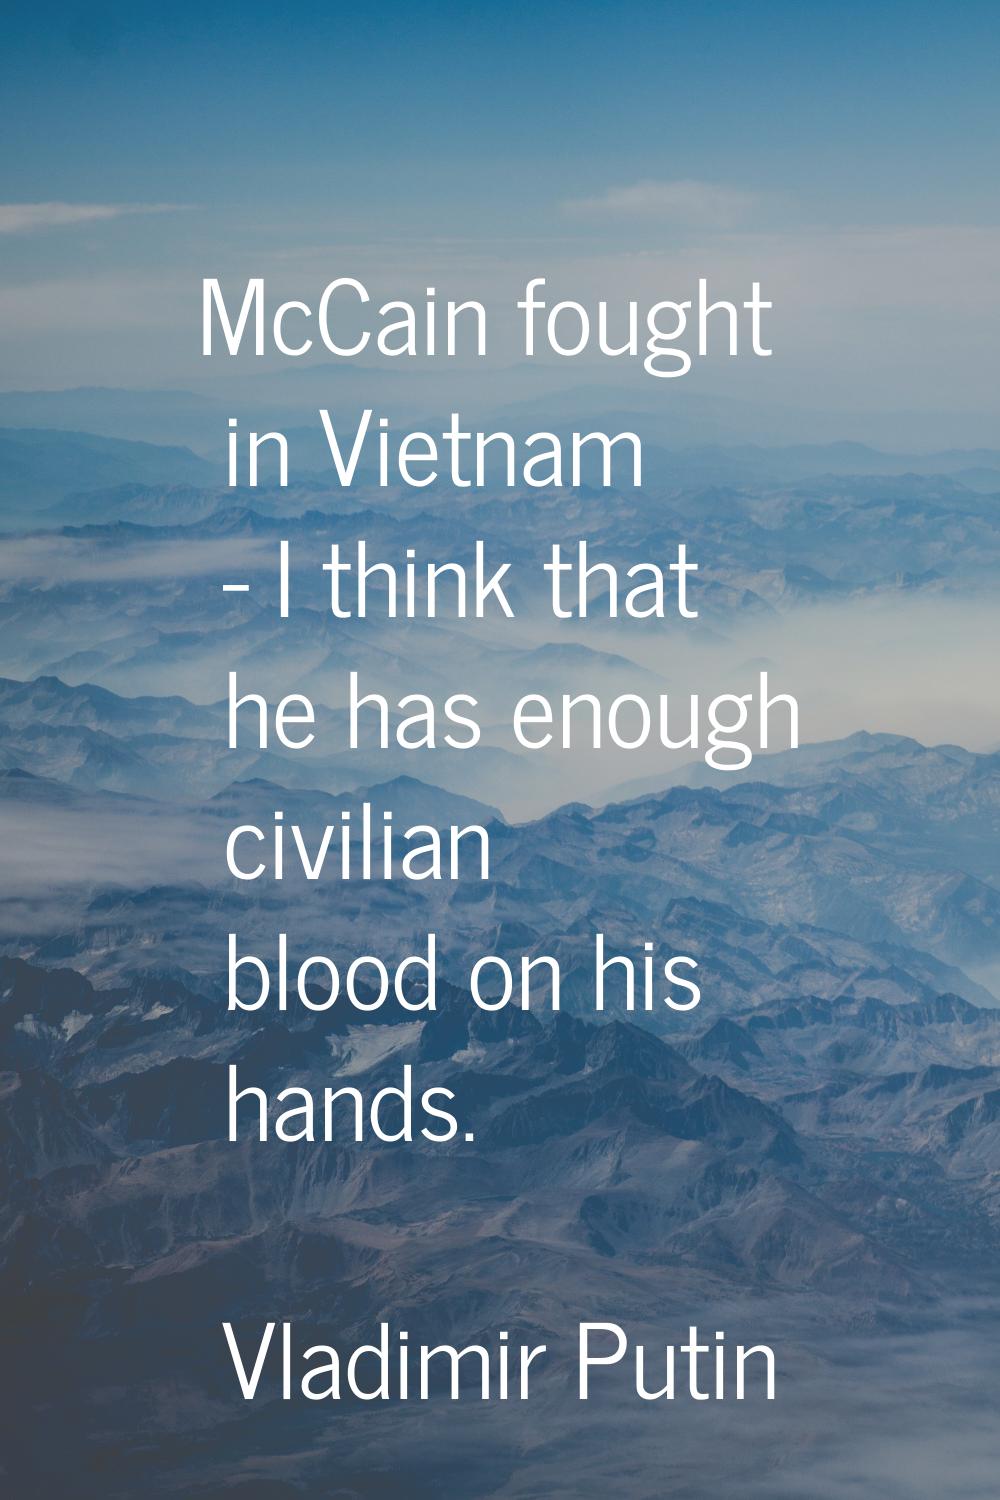 McCain fought in Vietnam - I think that he has enough civilian blood on his hands.